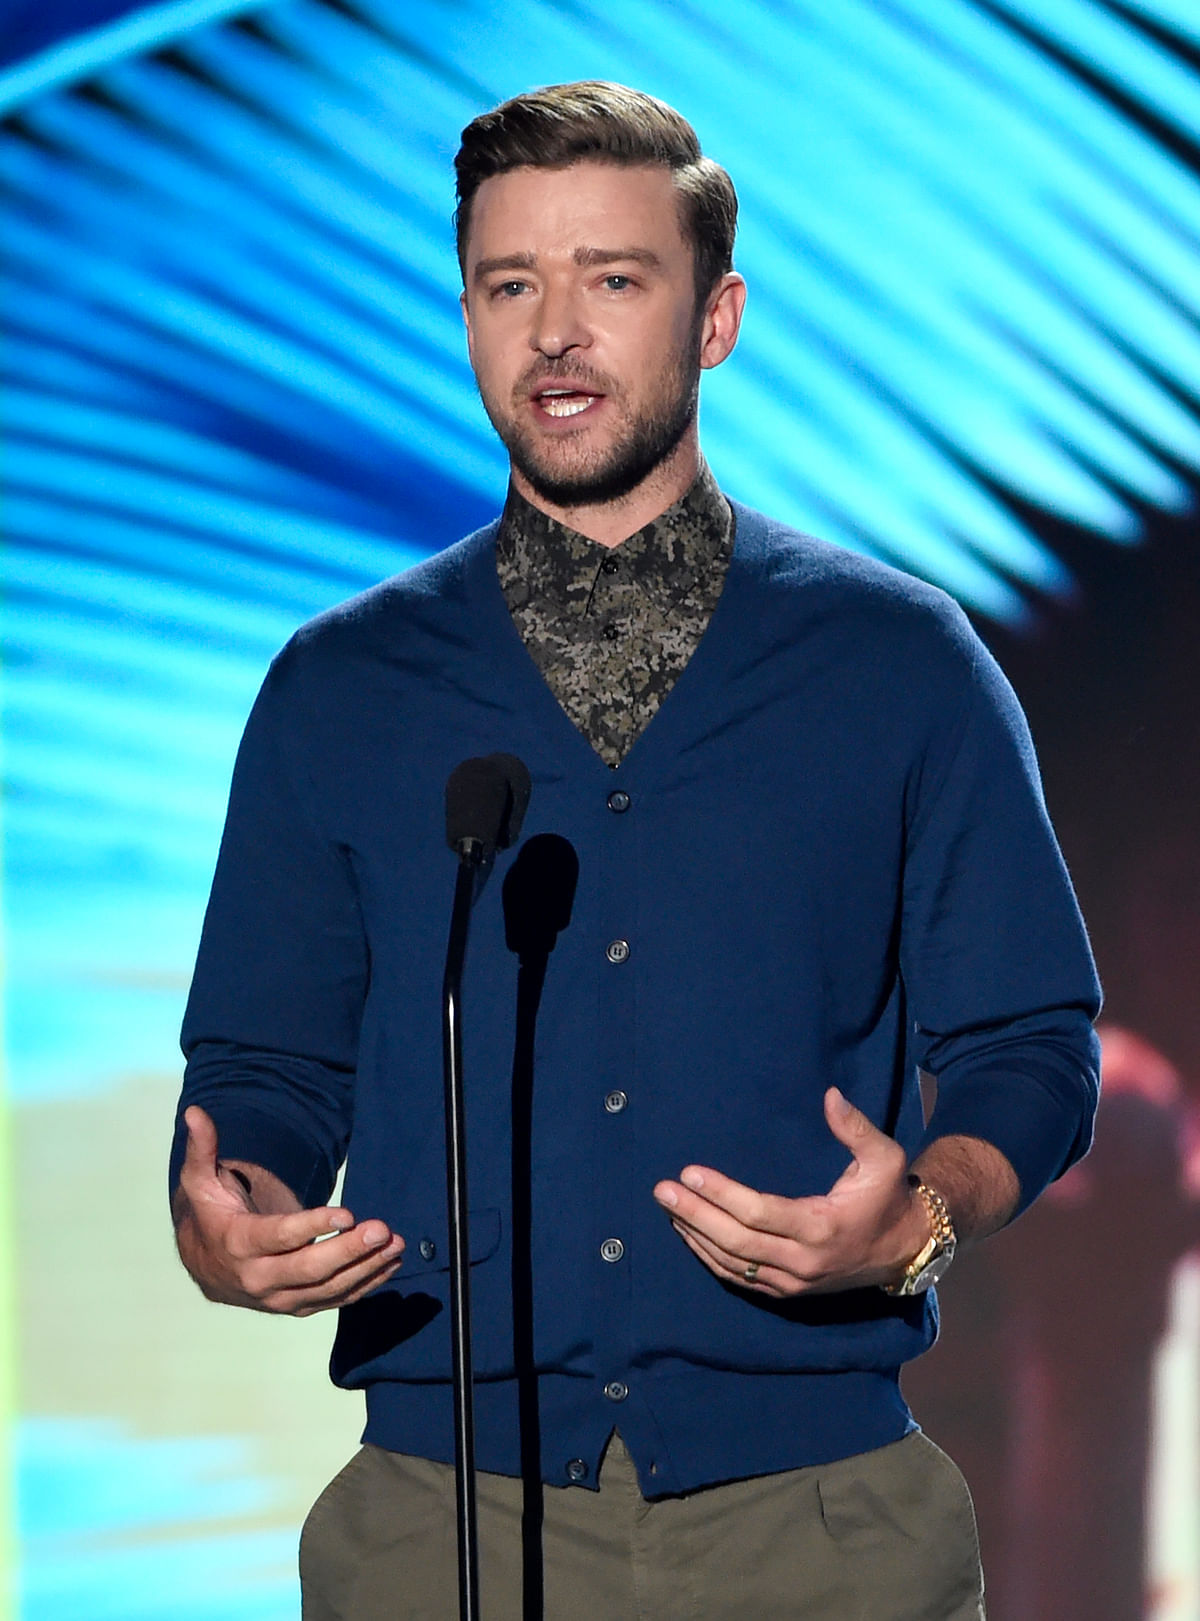 The Teen Choice Awards 2016 saw Justin Timberlake and Jessica Alba addressing violence and tolerance in the US.